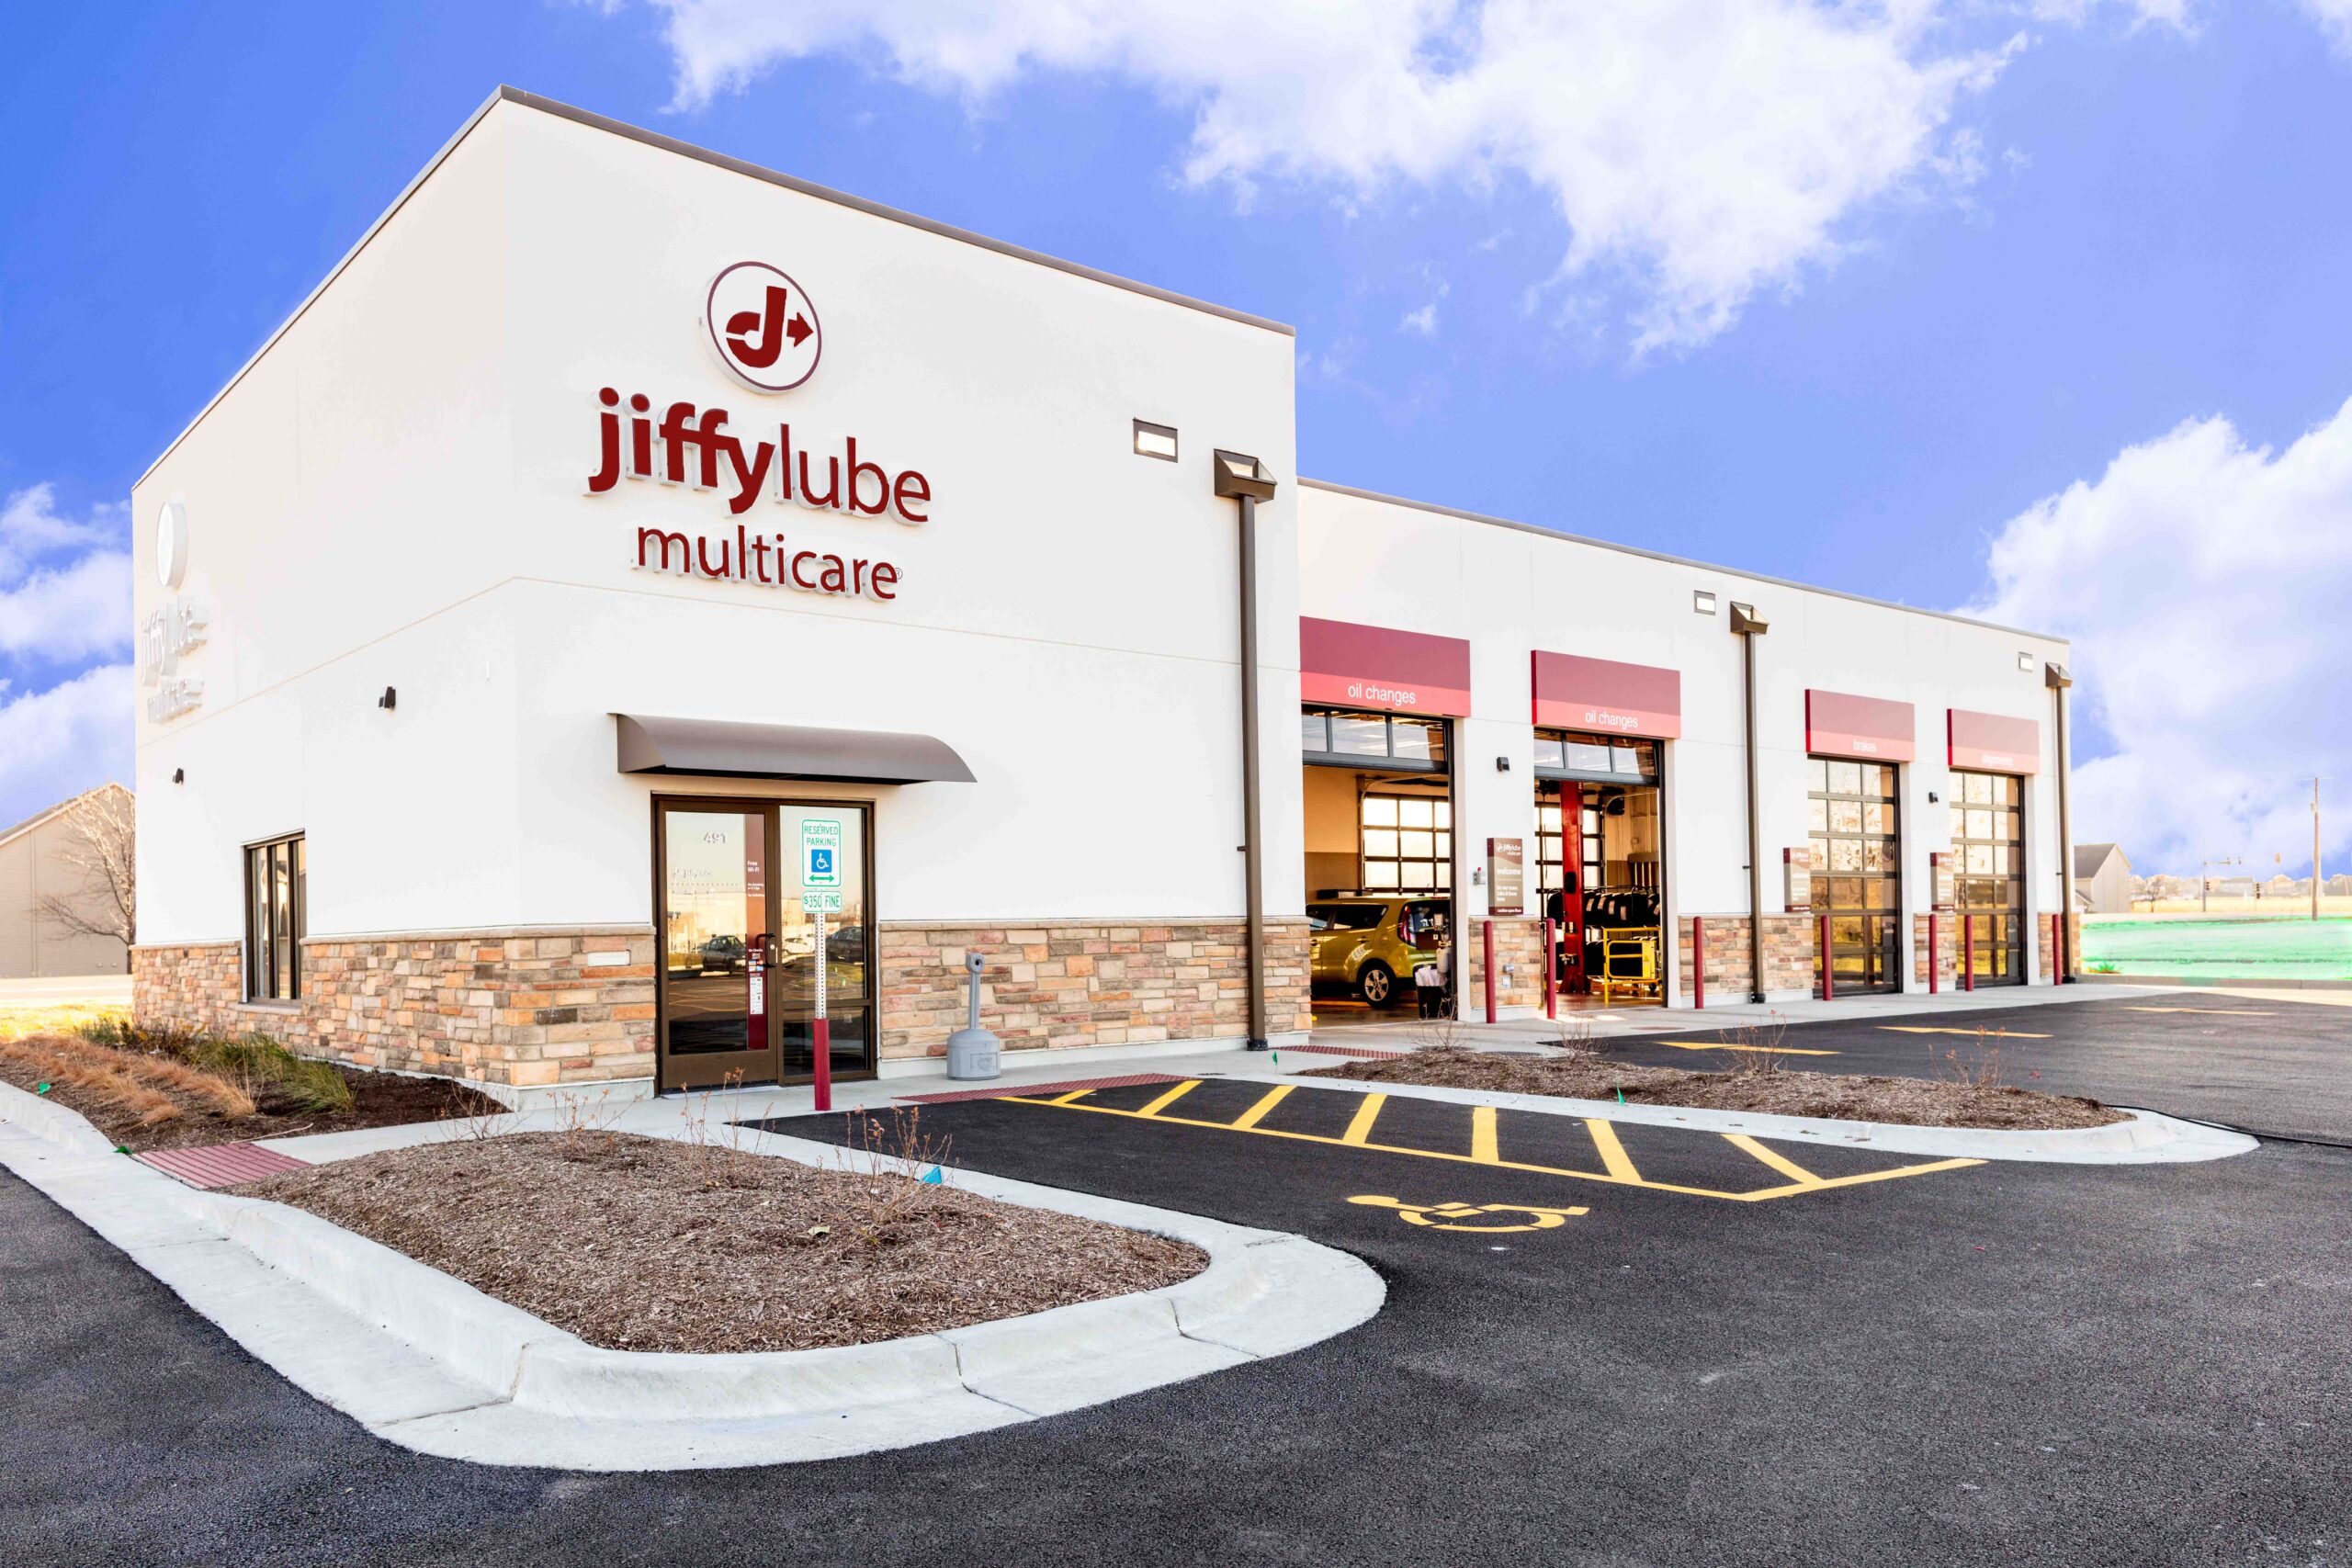 jiffy lube coupon services